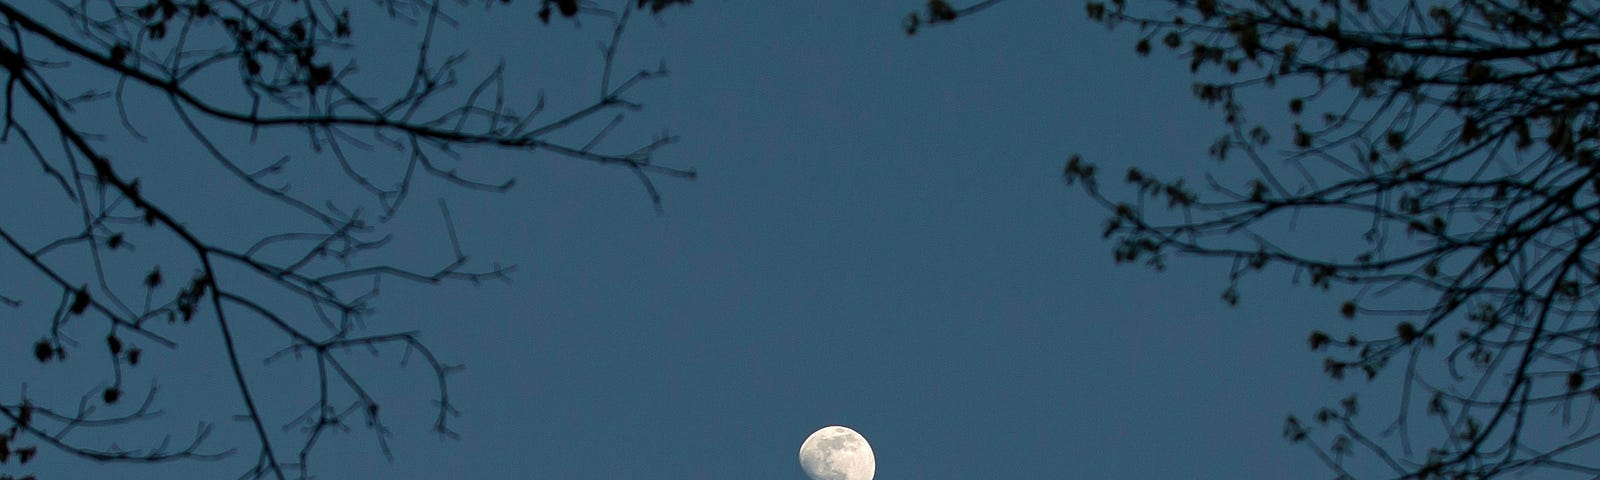 partial moon framed by branches during autumn